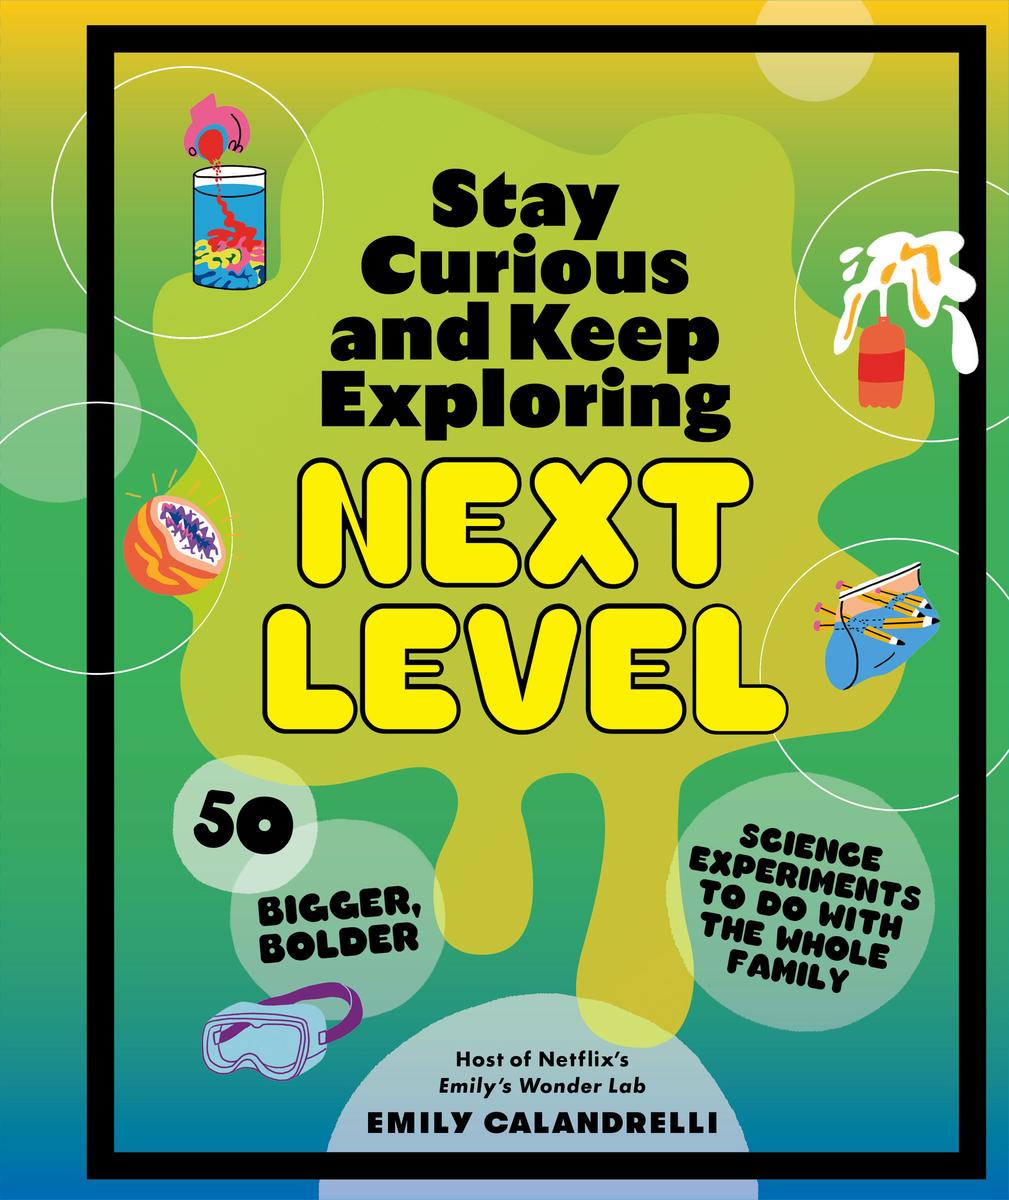 Stay Curious and Keep Exploring - Next Level: 50 Bigger, Bolder Science Experiments to Do with the Whole Family